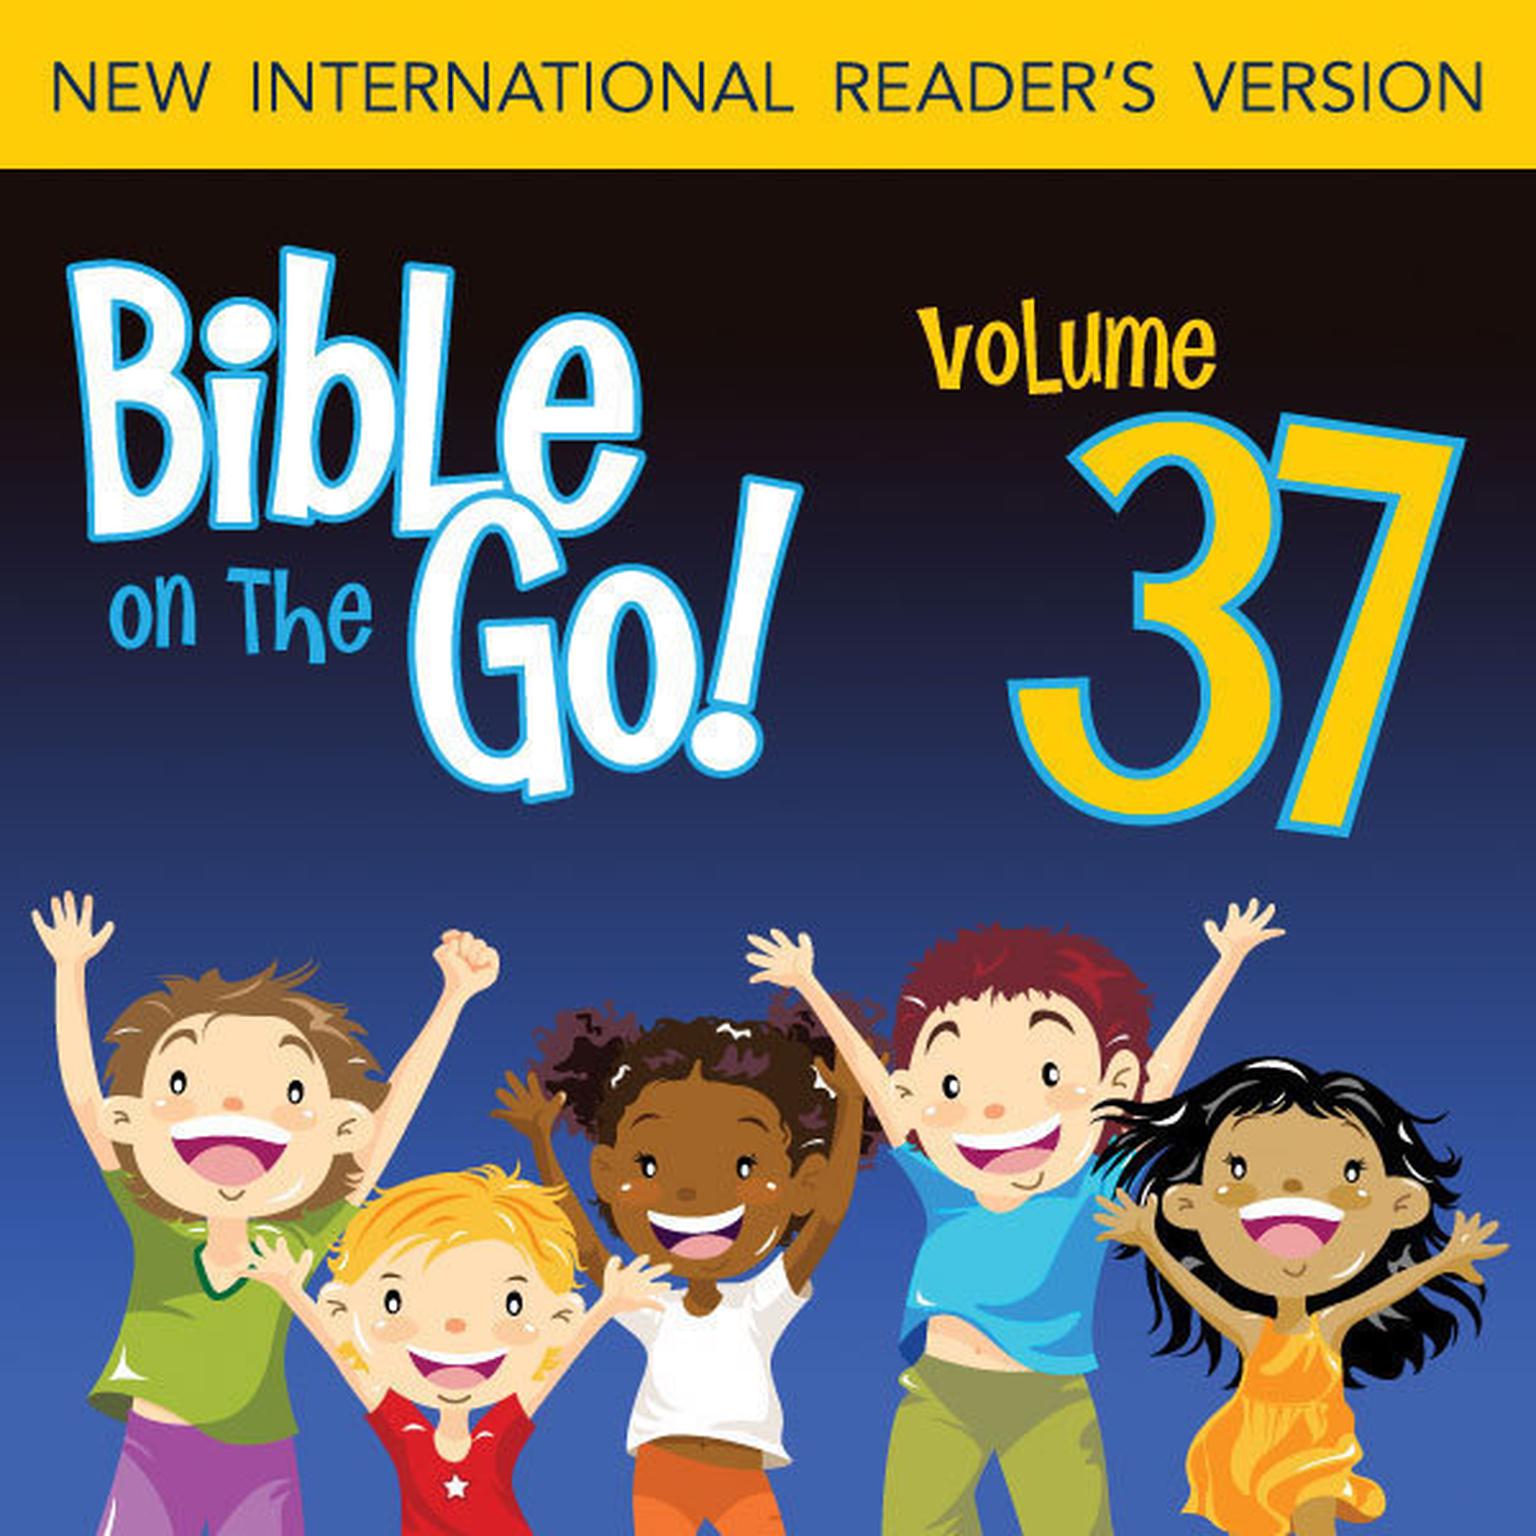 Bible on the Go Audio Bible - New International Readers Version, NIrV: Vol. 37 The Sermon on the Mount, Part 2; Parables and Miracles of Jesus, Part 1 (Matthew 7-8, 13; Mark 4-5) Audiobook, by Zondervan